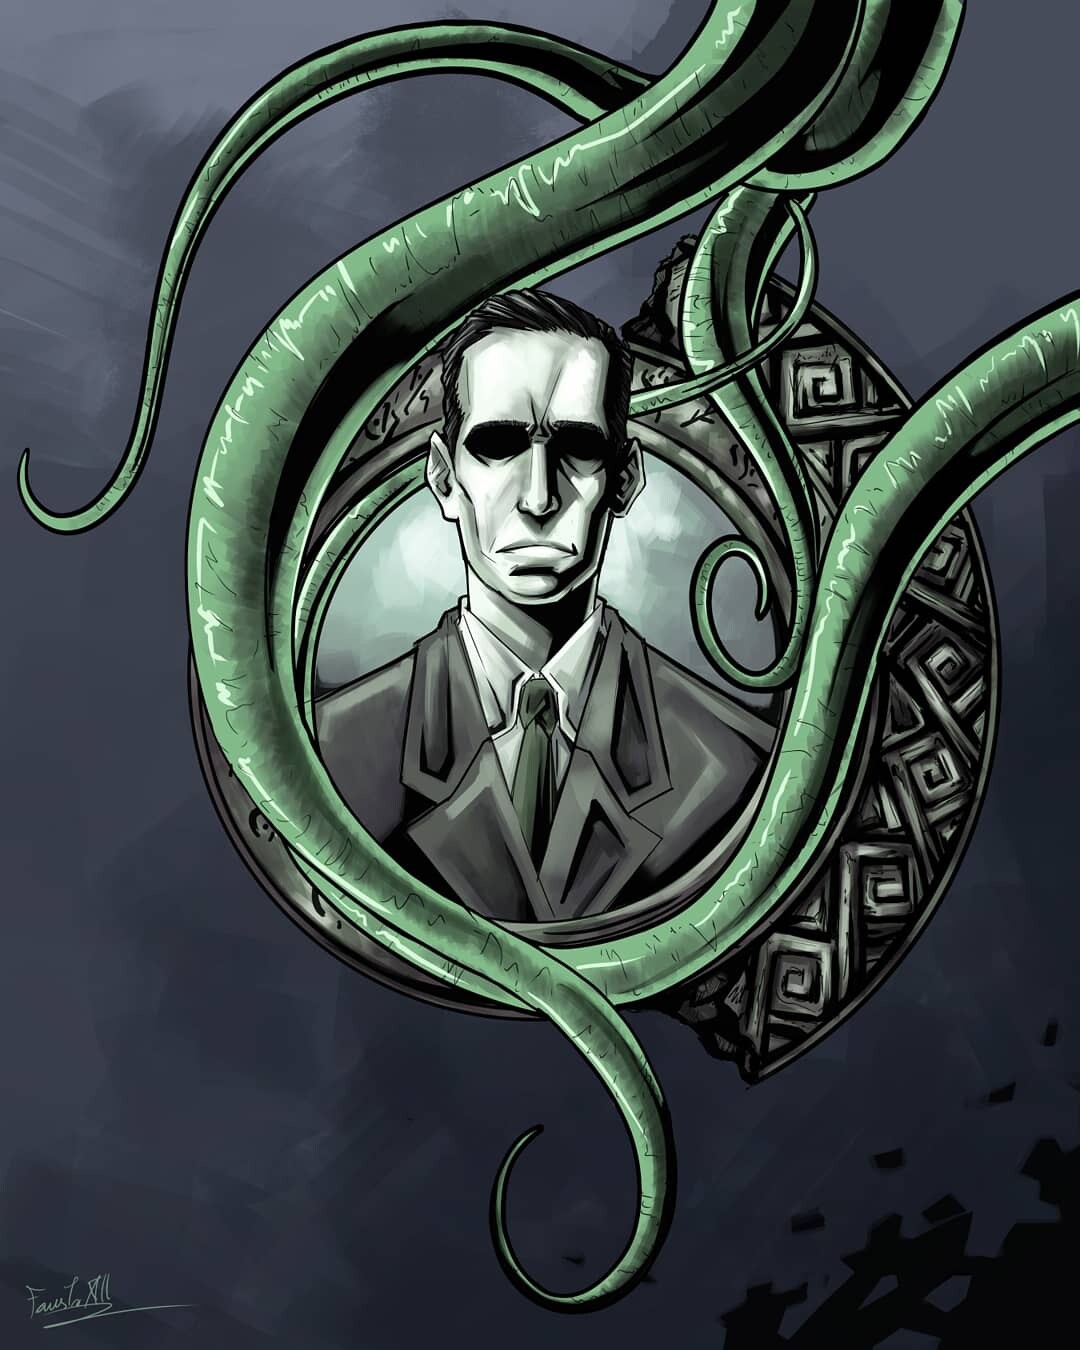 Biography of Lovecraft, Fausto XIII.